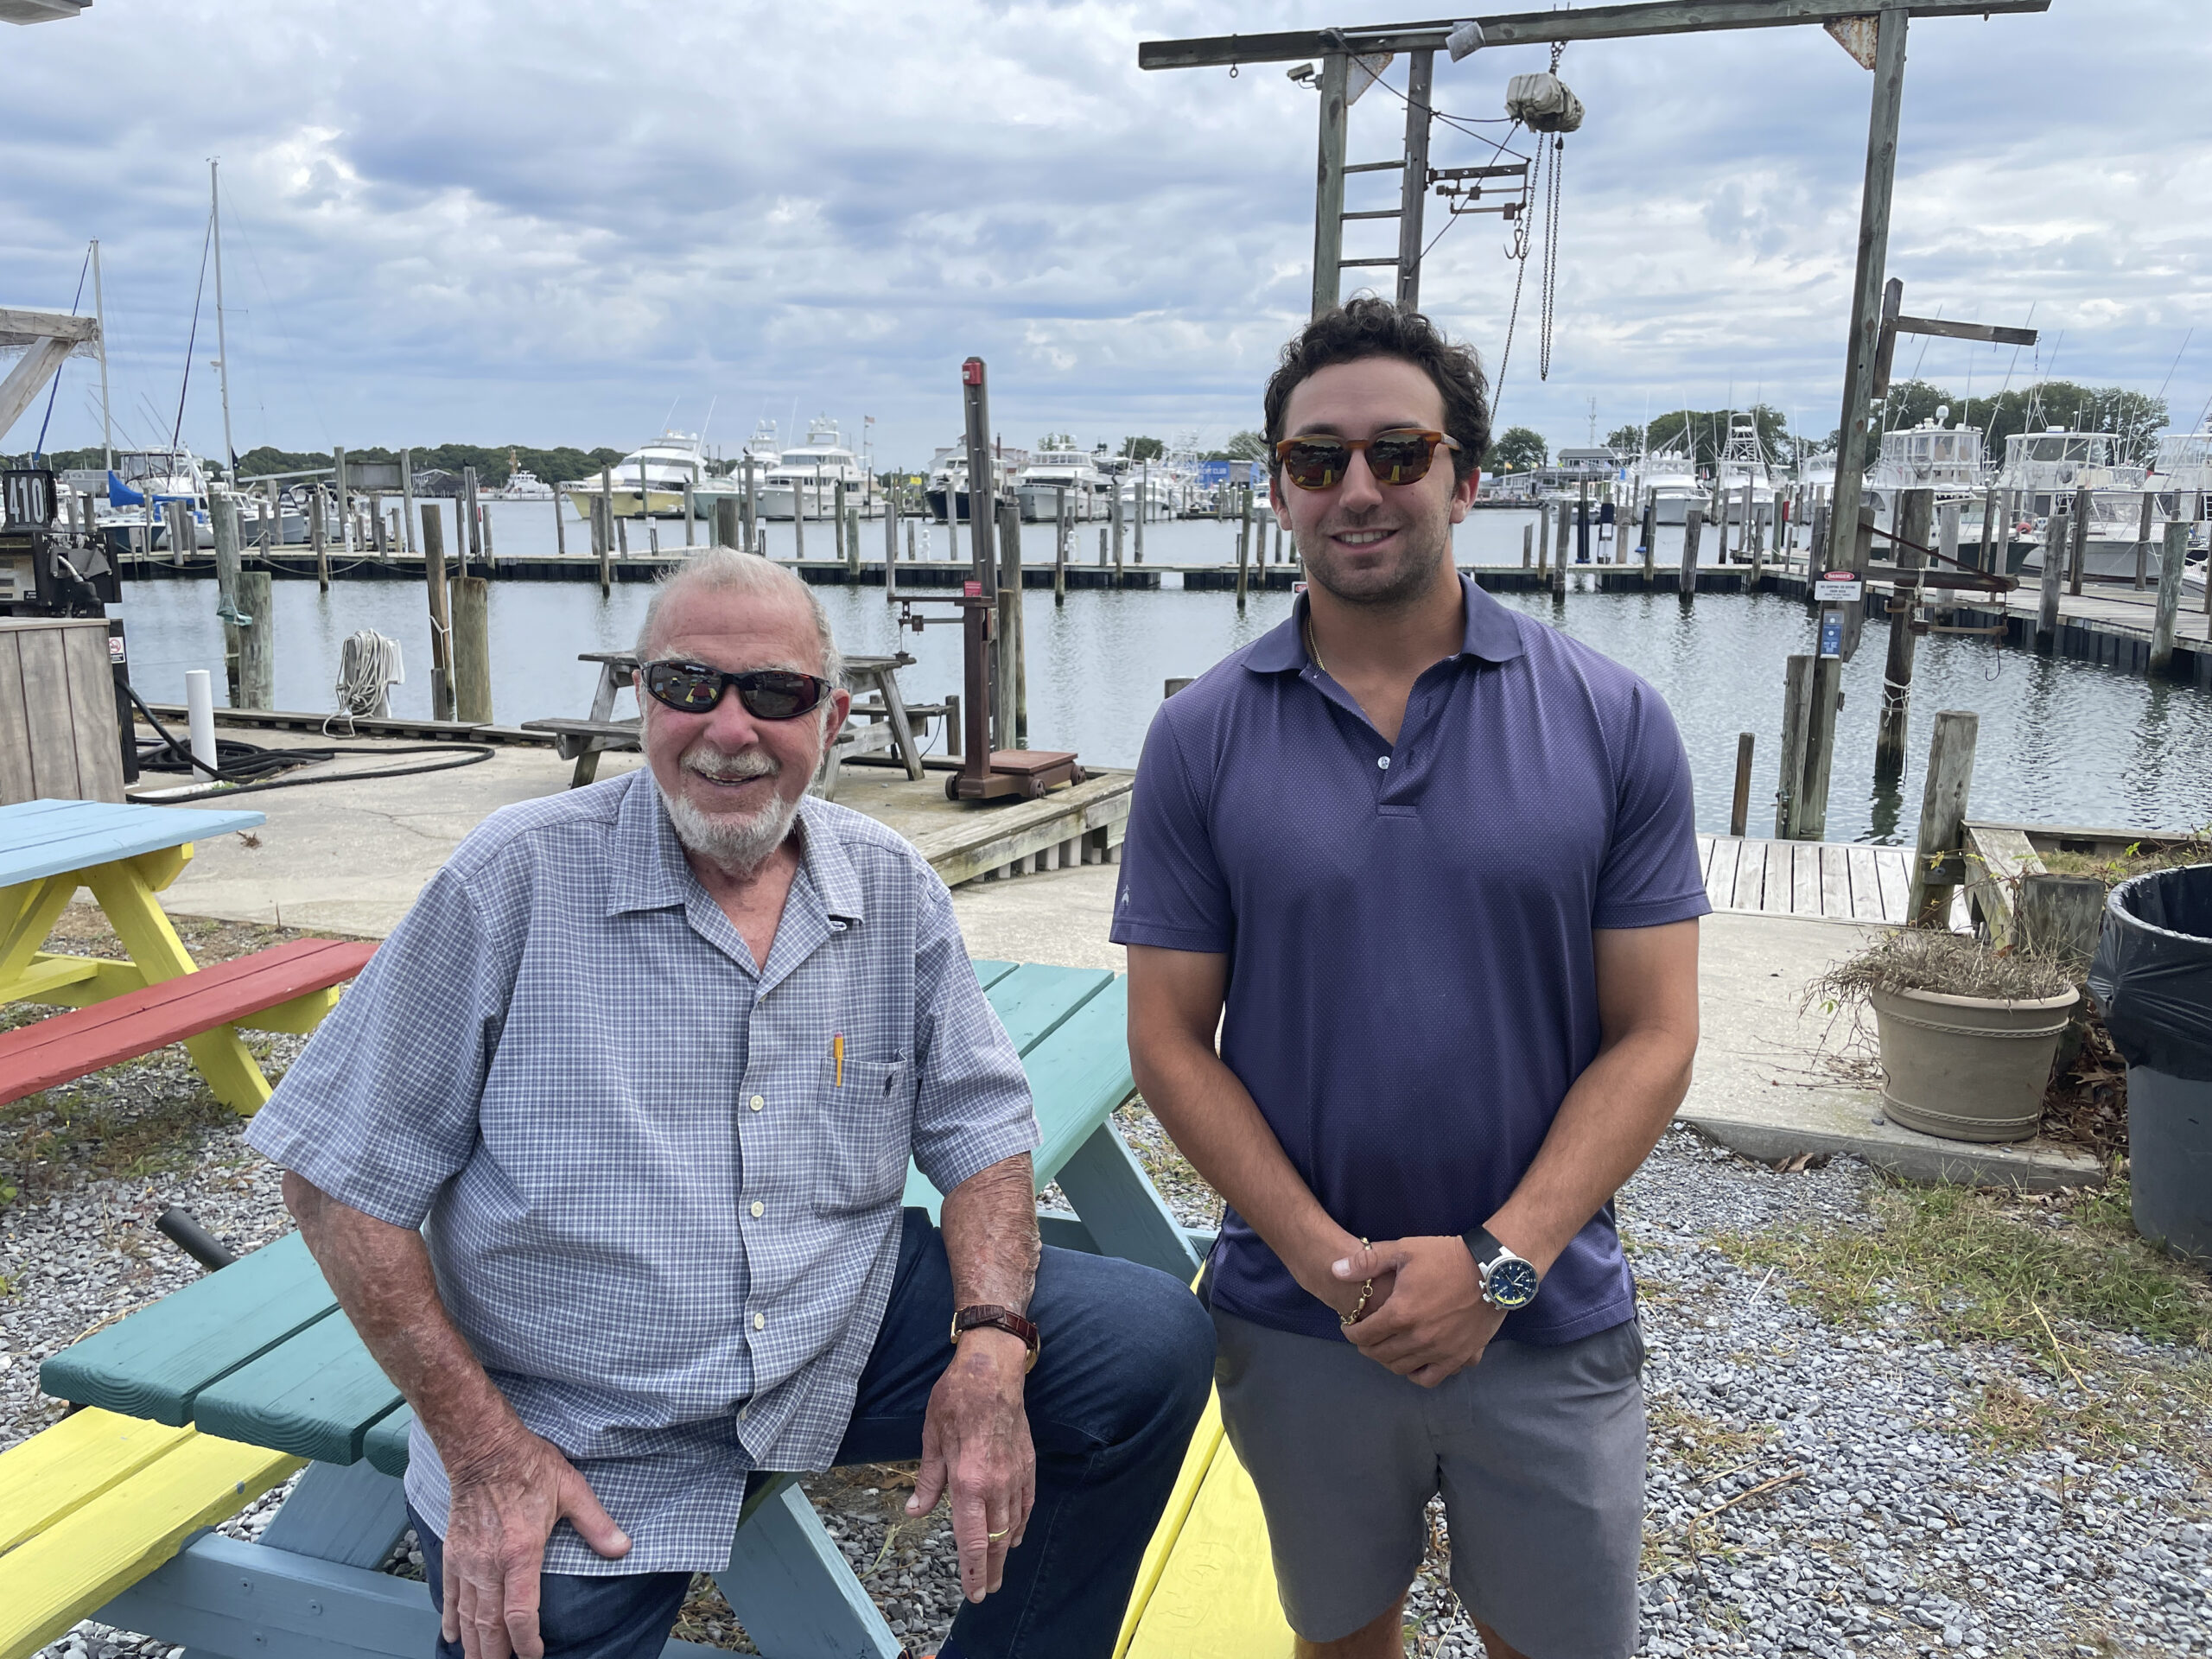 Sam Gershowitz and his grandson Alex Gershowitz, who is the general manager of Star Island Yacht Club, at the offshore sports Marina in Montauk, which Gershowitz purchased earlier this month.  MICHAEL WRIGHT